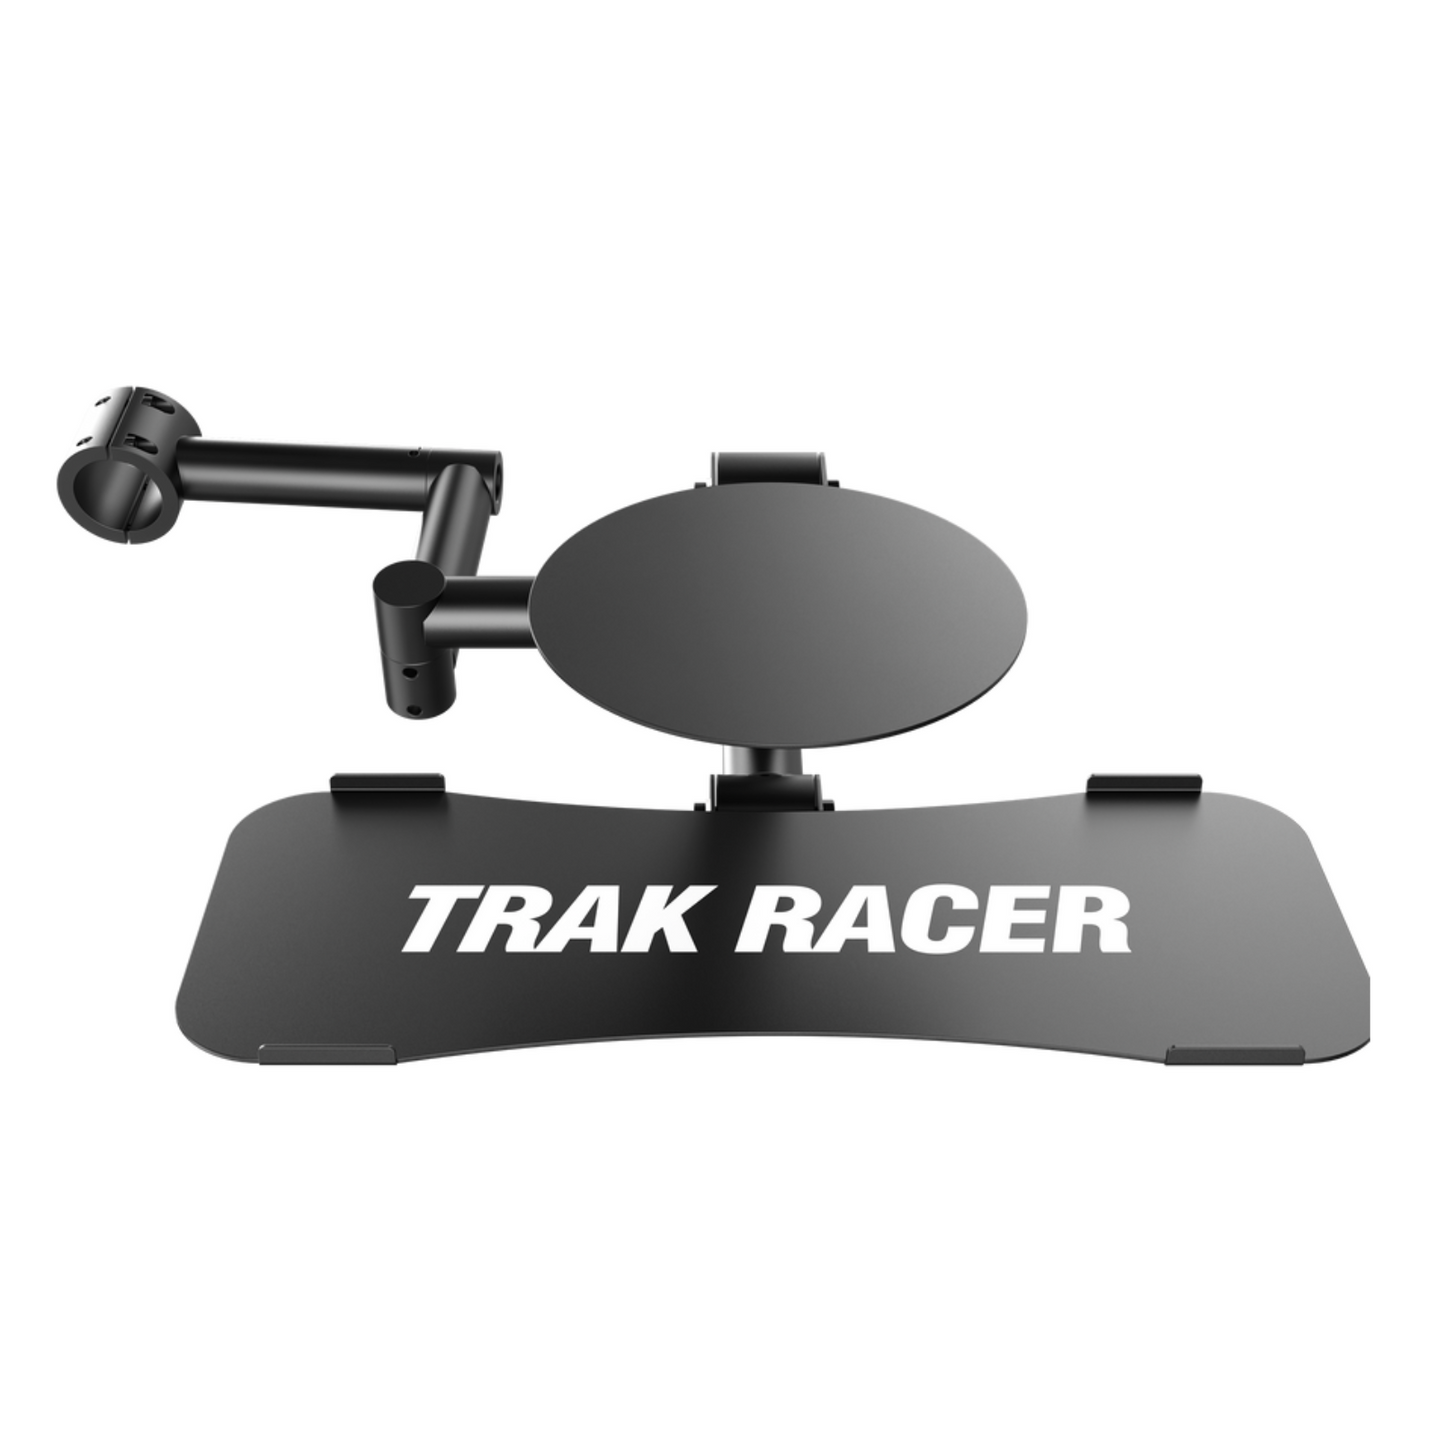 Trak Racer Keyboard and Mouse mount new TR8 and F1